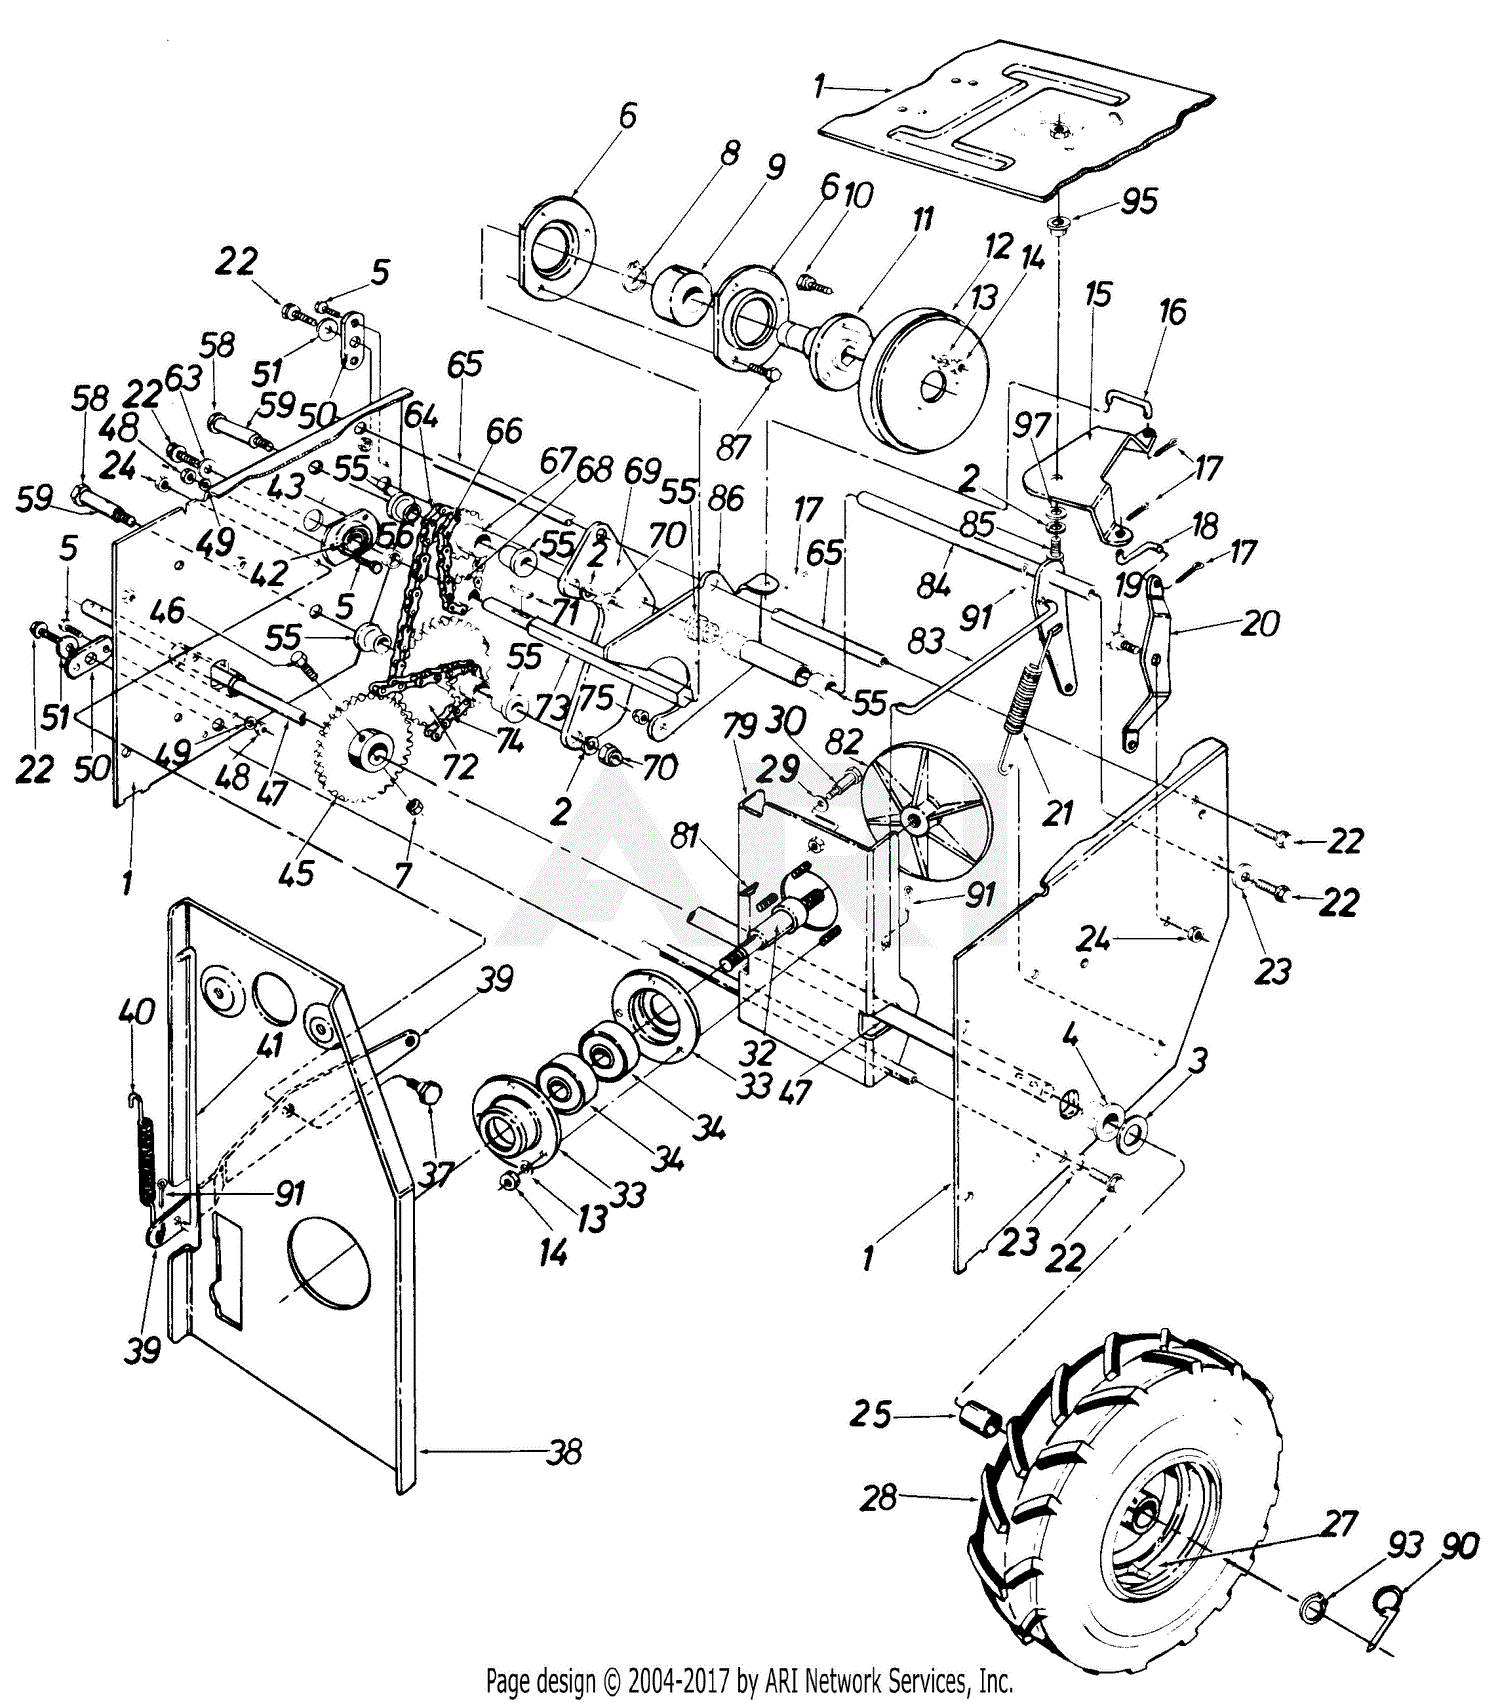 MTD 315800190 8 HP Snow Thrower (1985) Parts Diagram for Wheel Drive